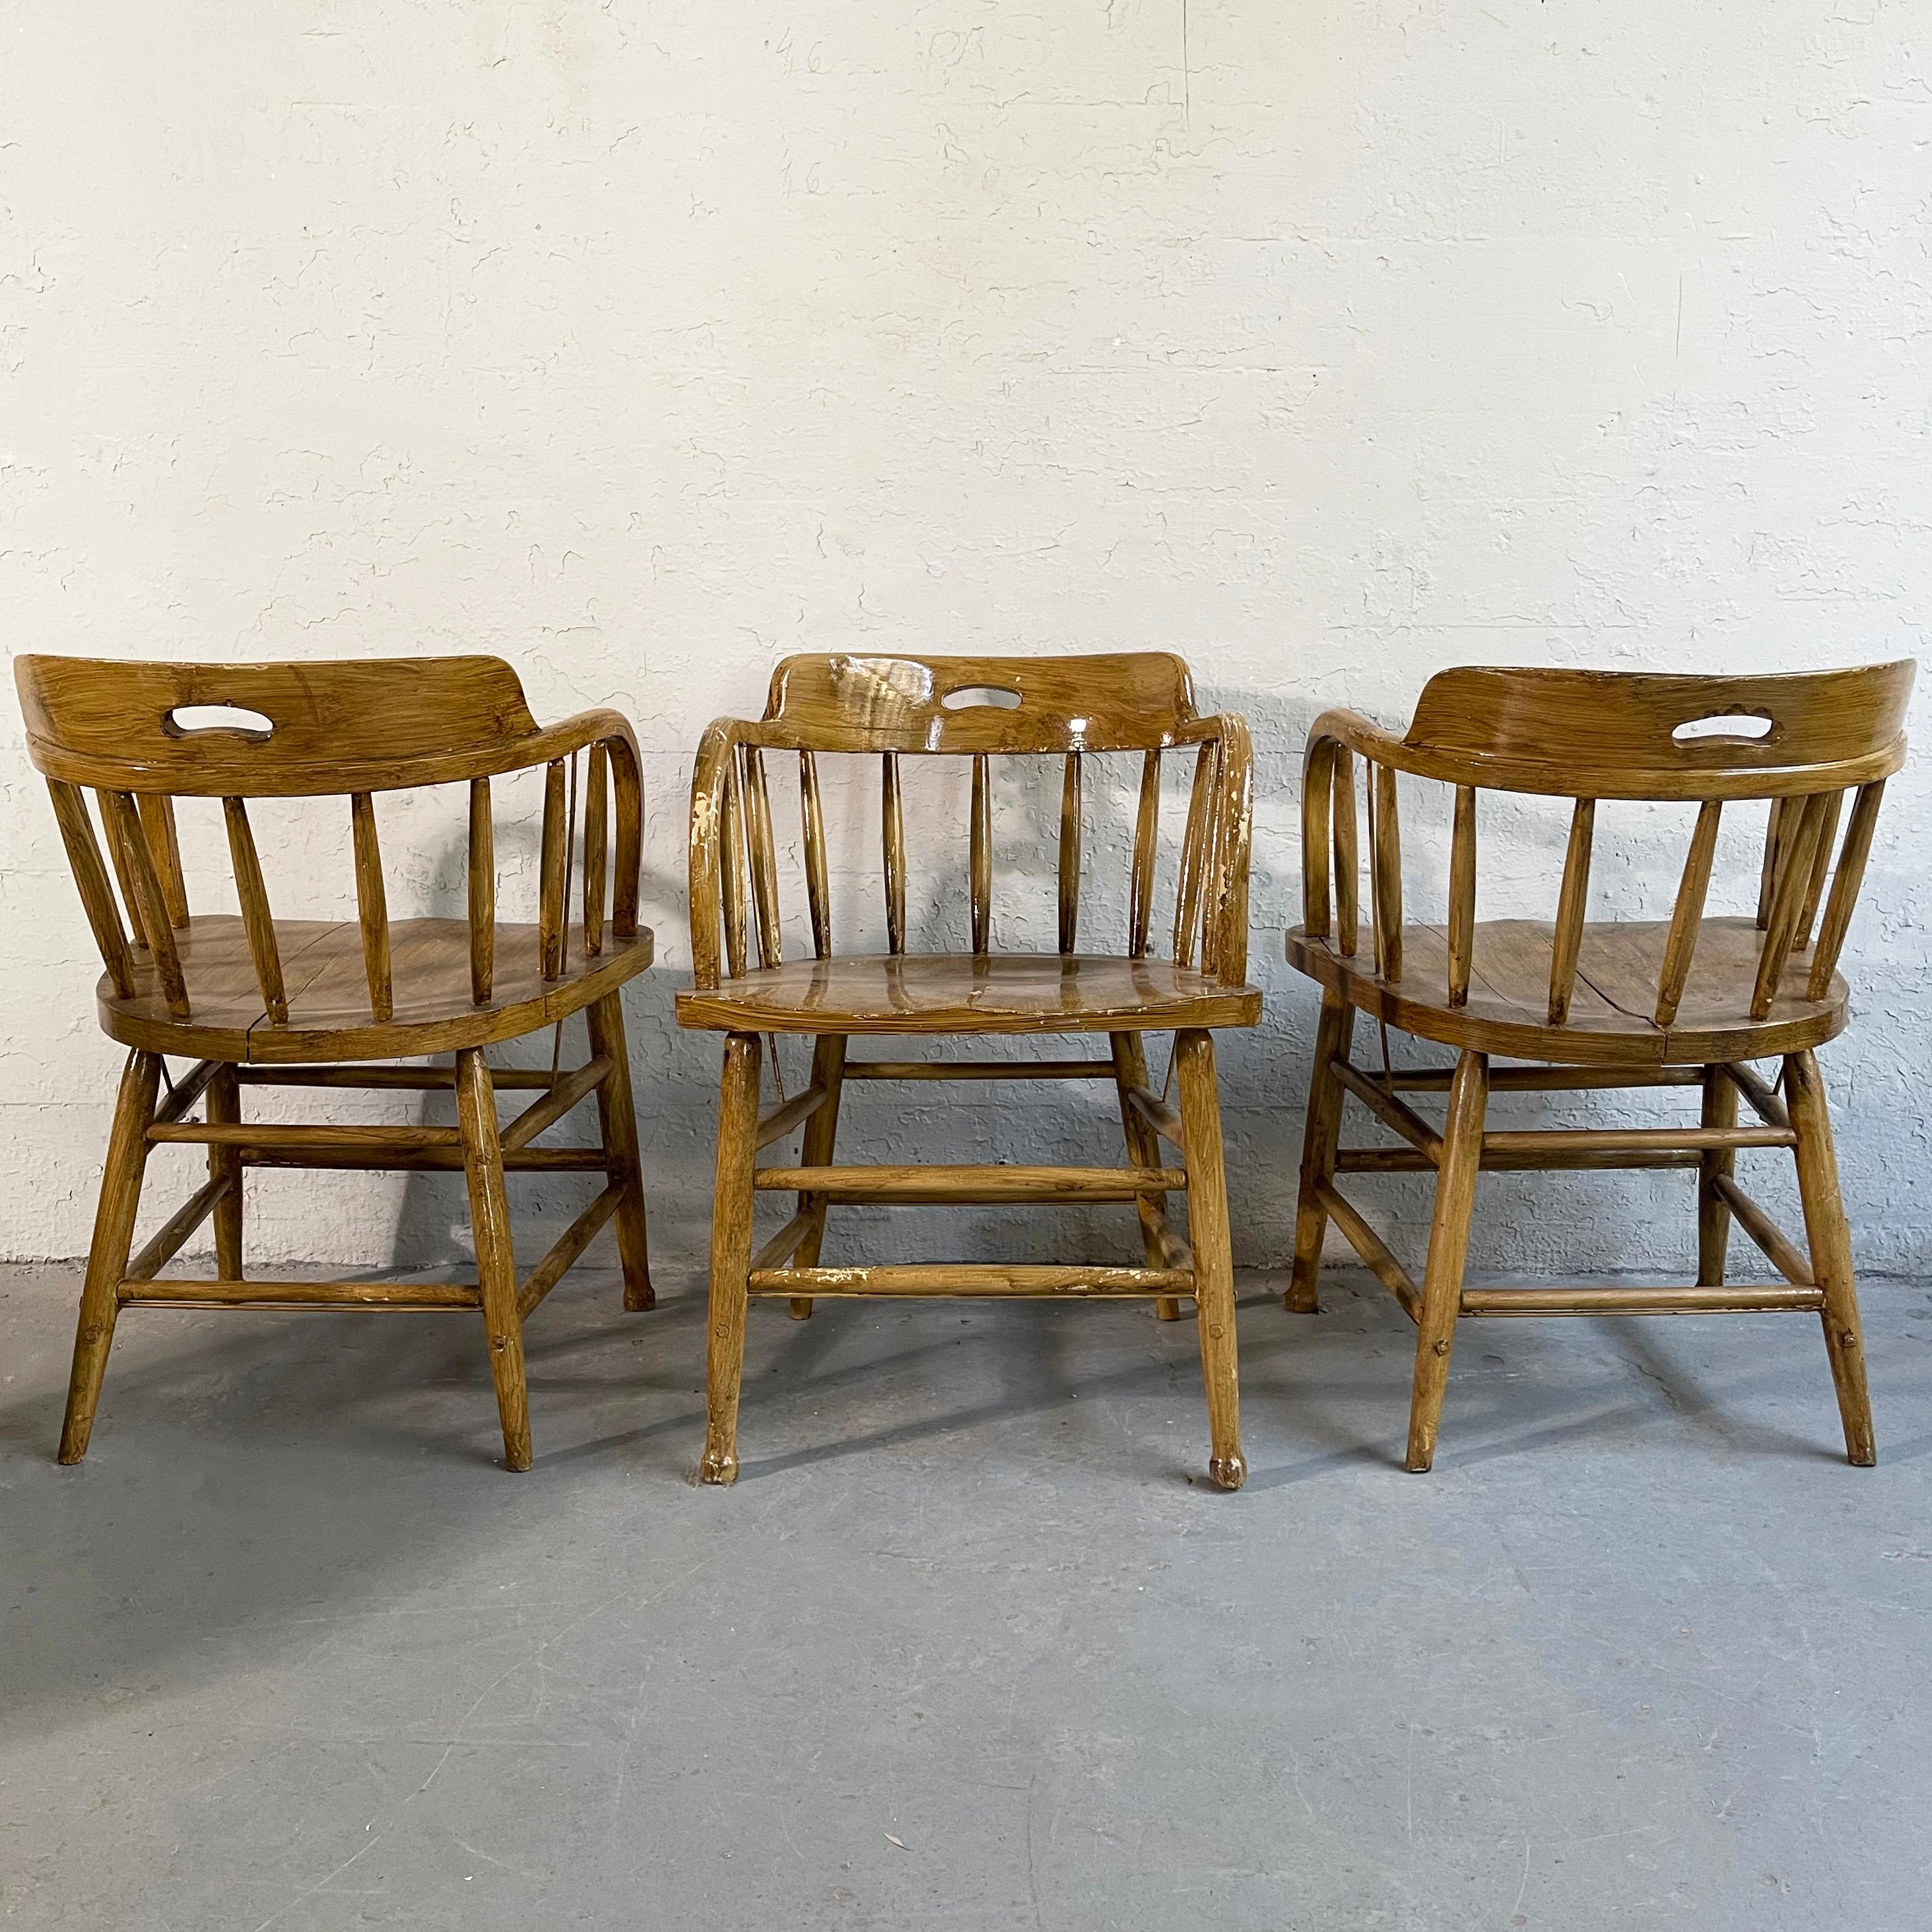 Early 20th Century, Rustic Oak Firehouse Dining Chairs For Sale 2